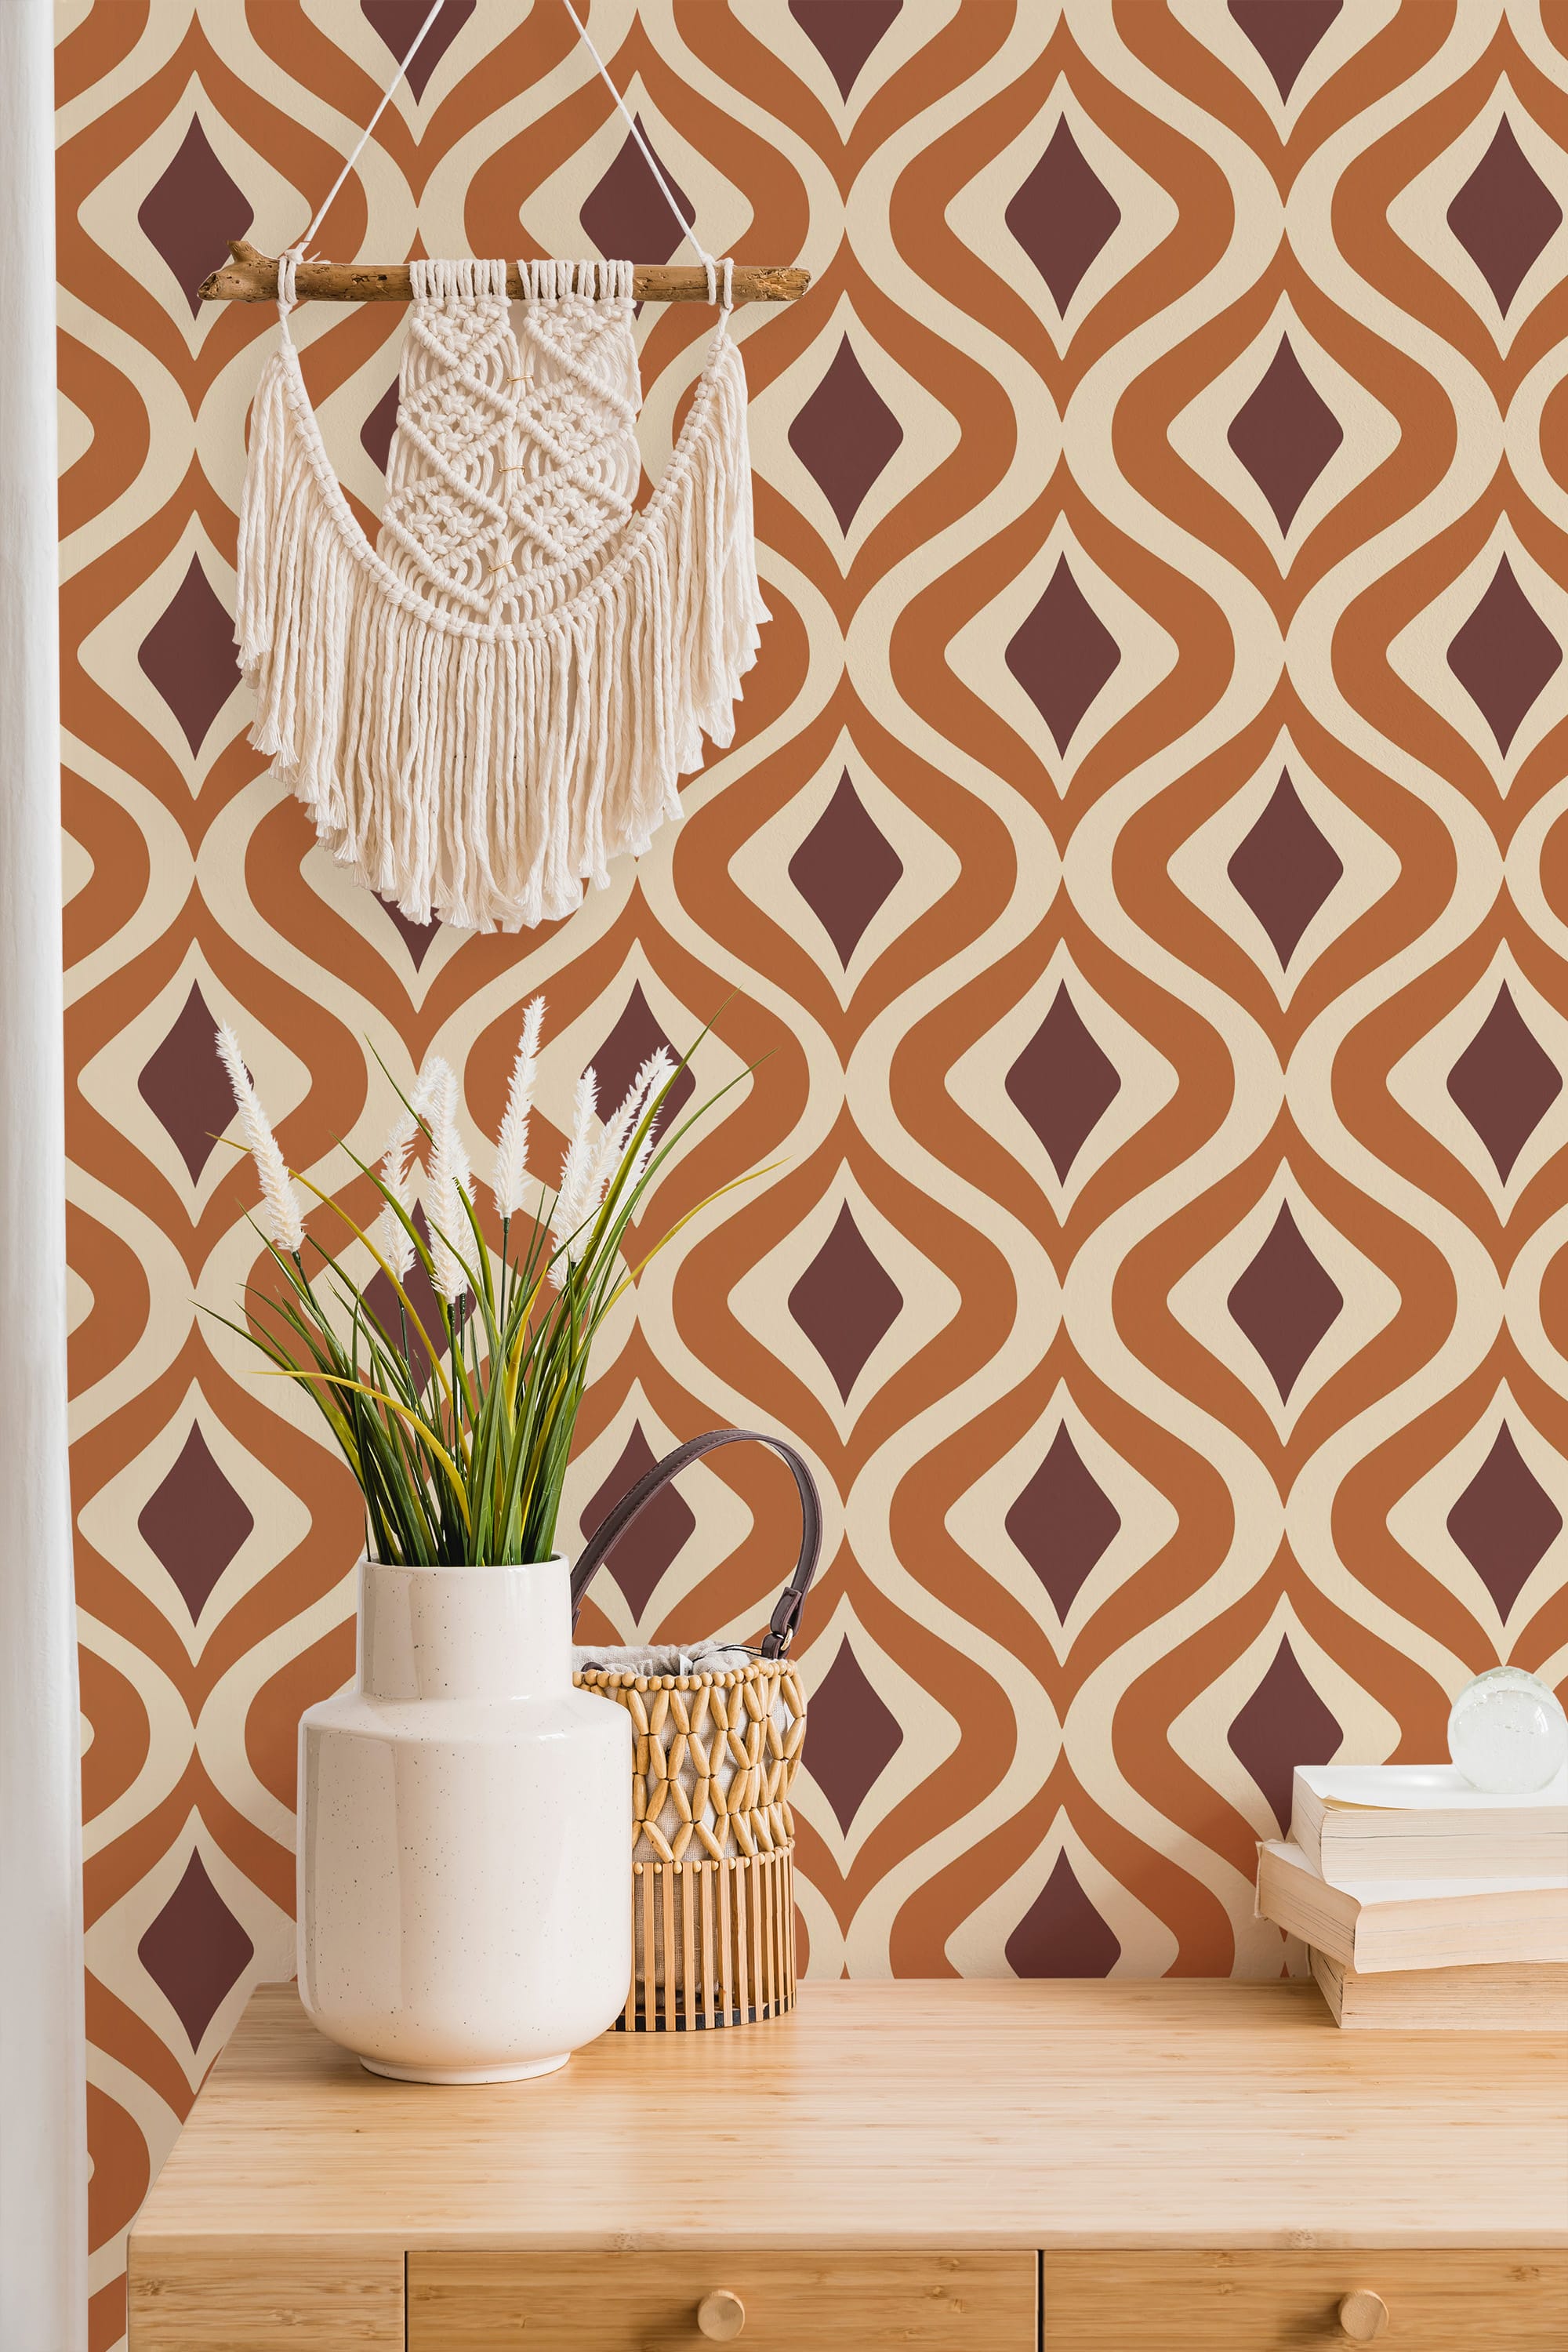 Retro wallpaper - Peel and Stick or Traditional